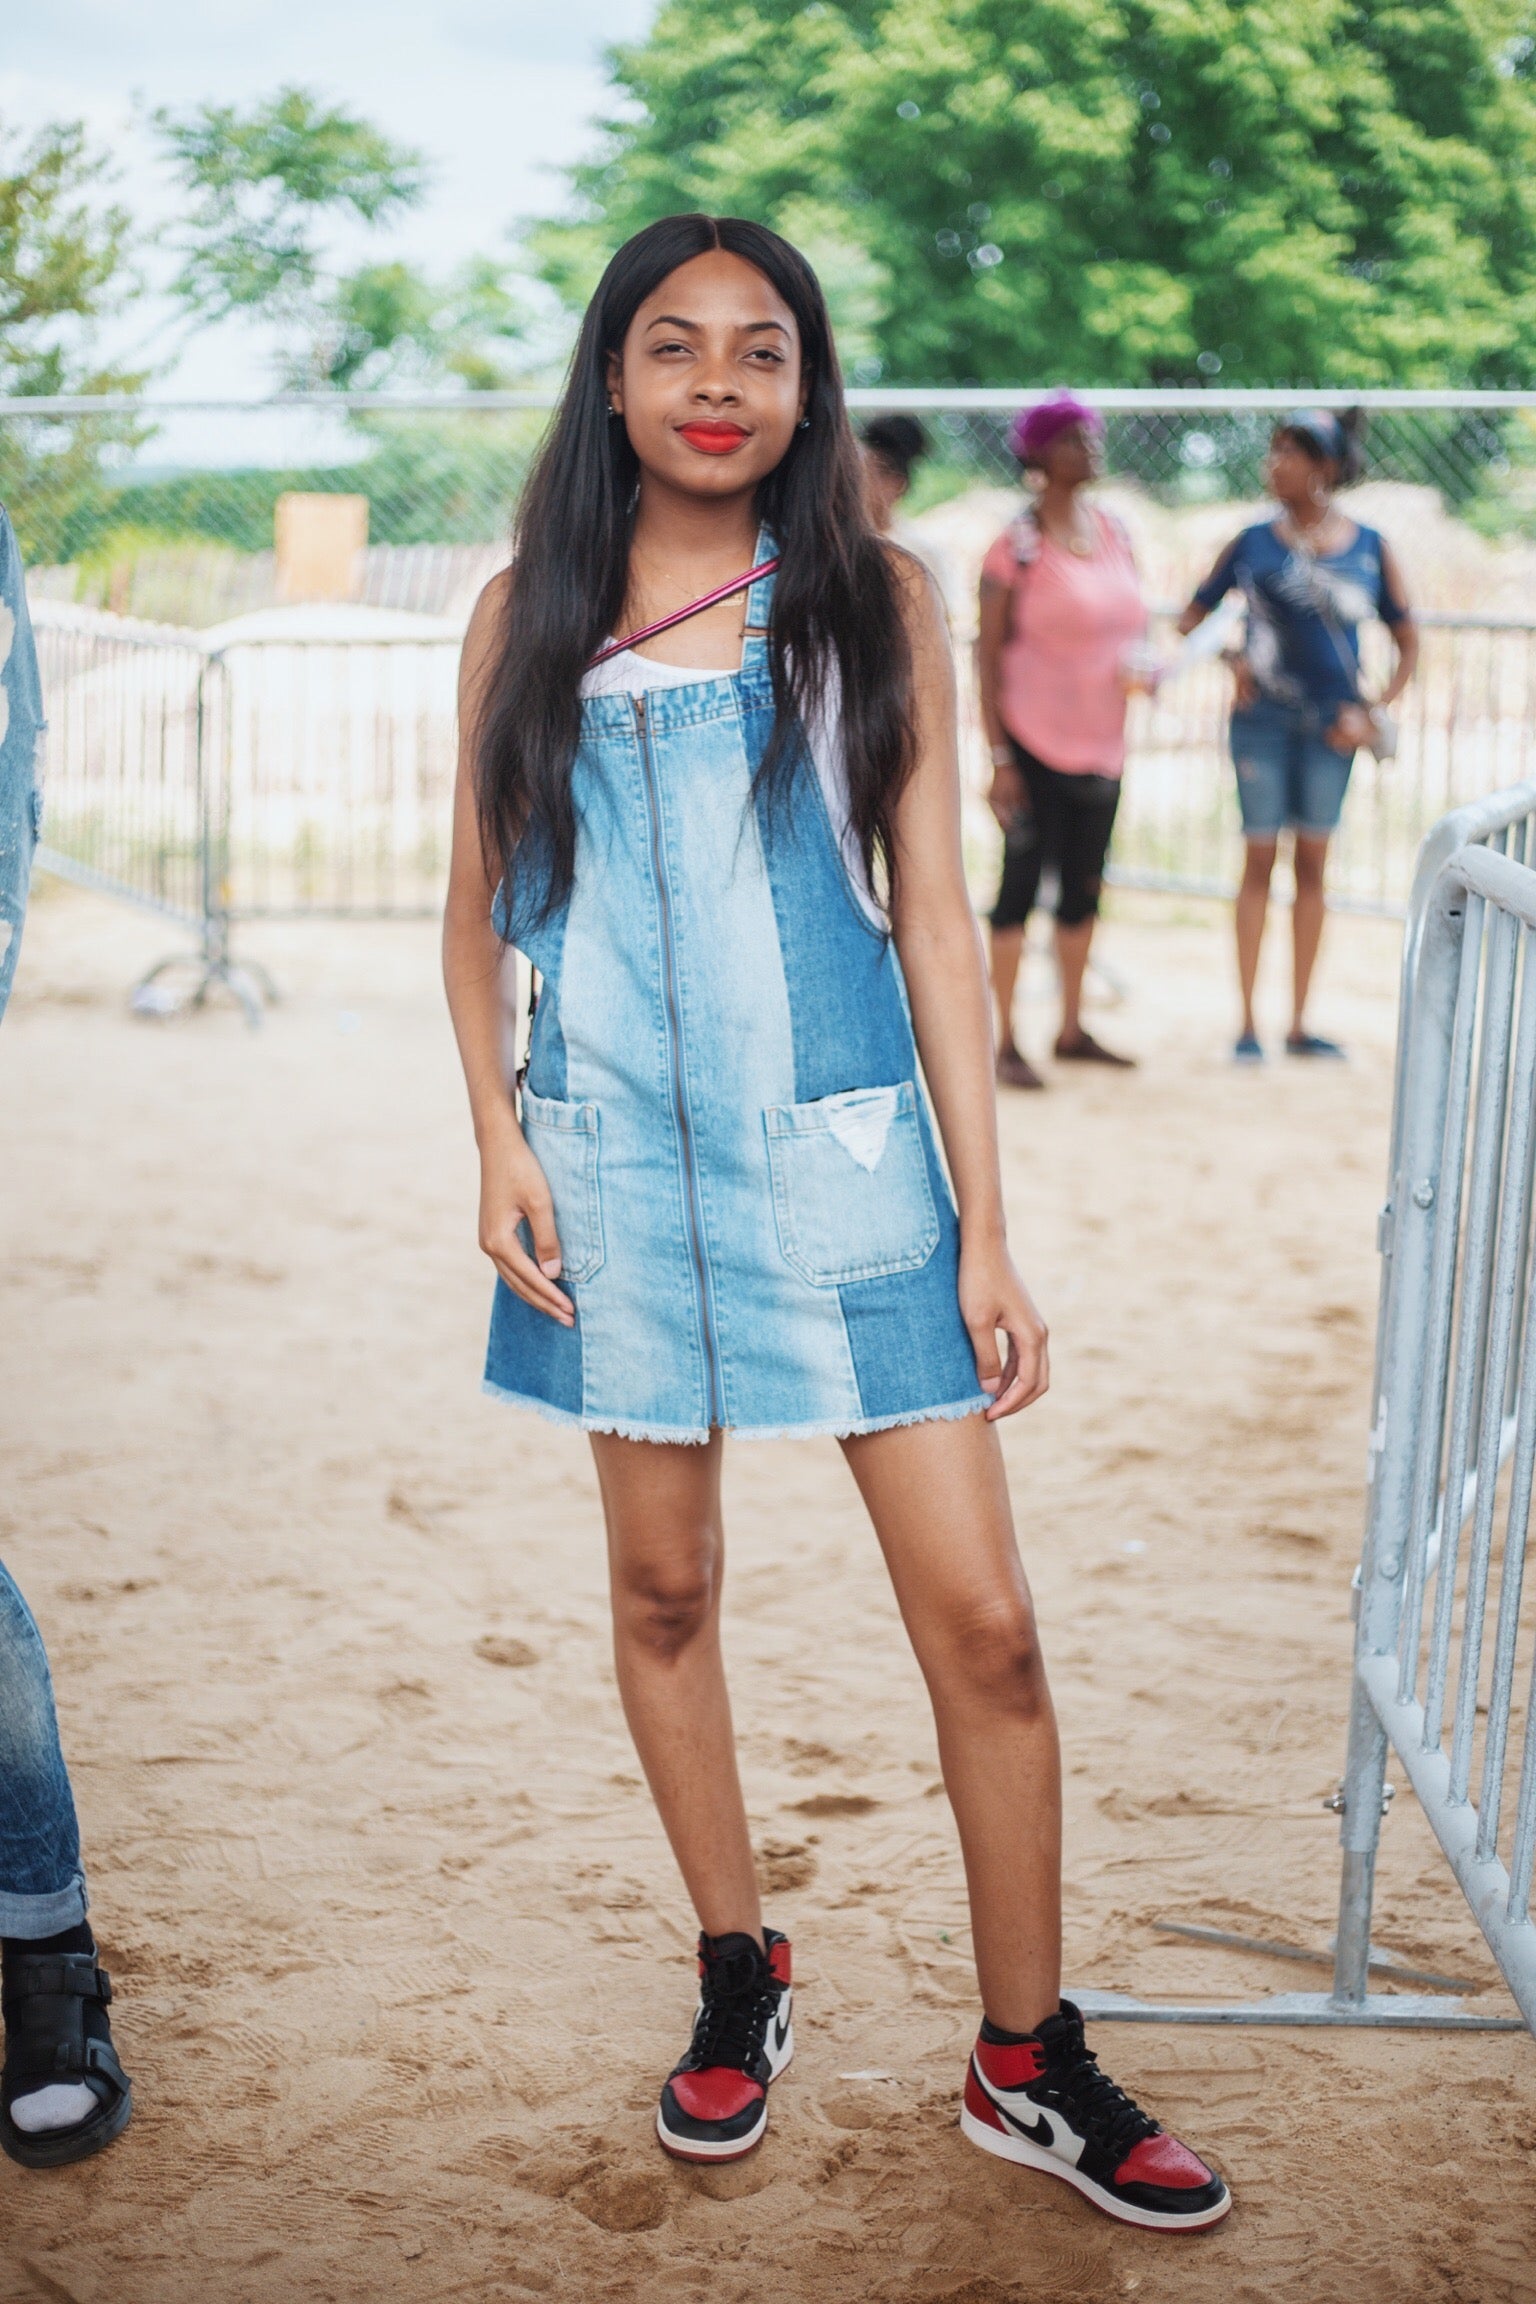 Everyone Looked Amazing At The 2018 Roots Picnic
